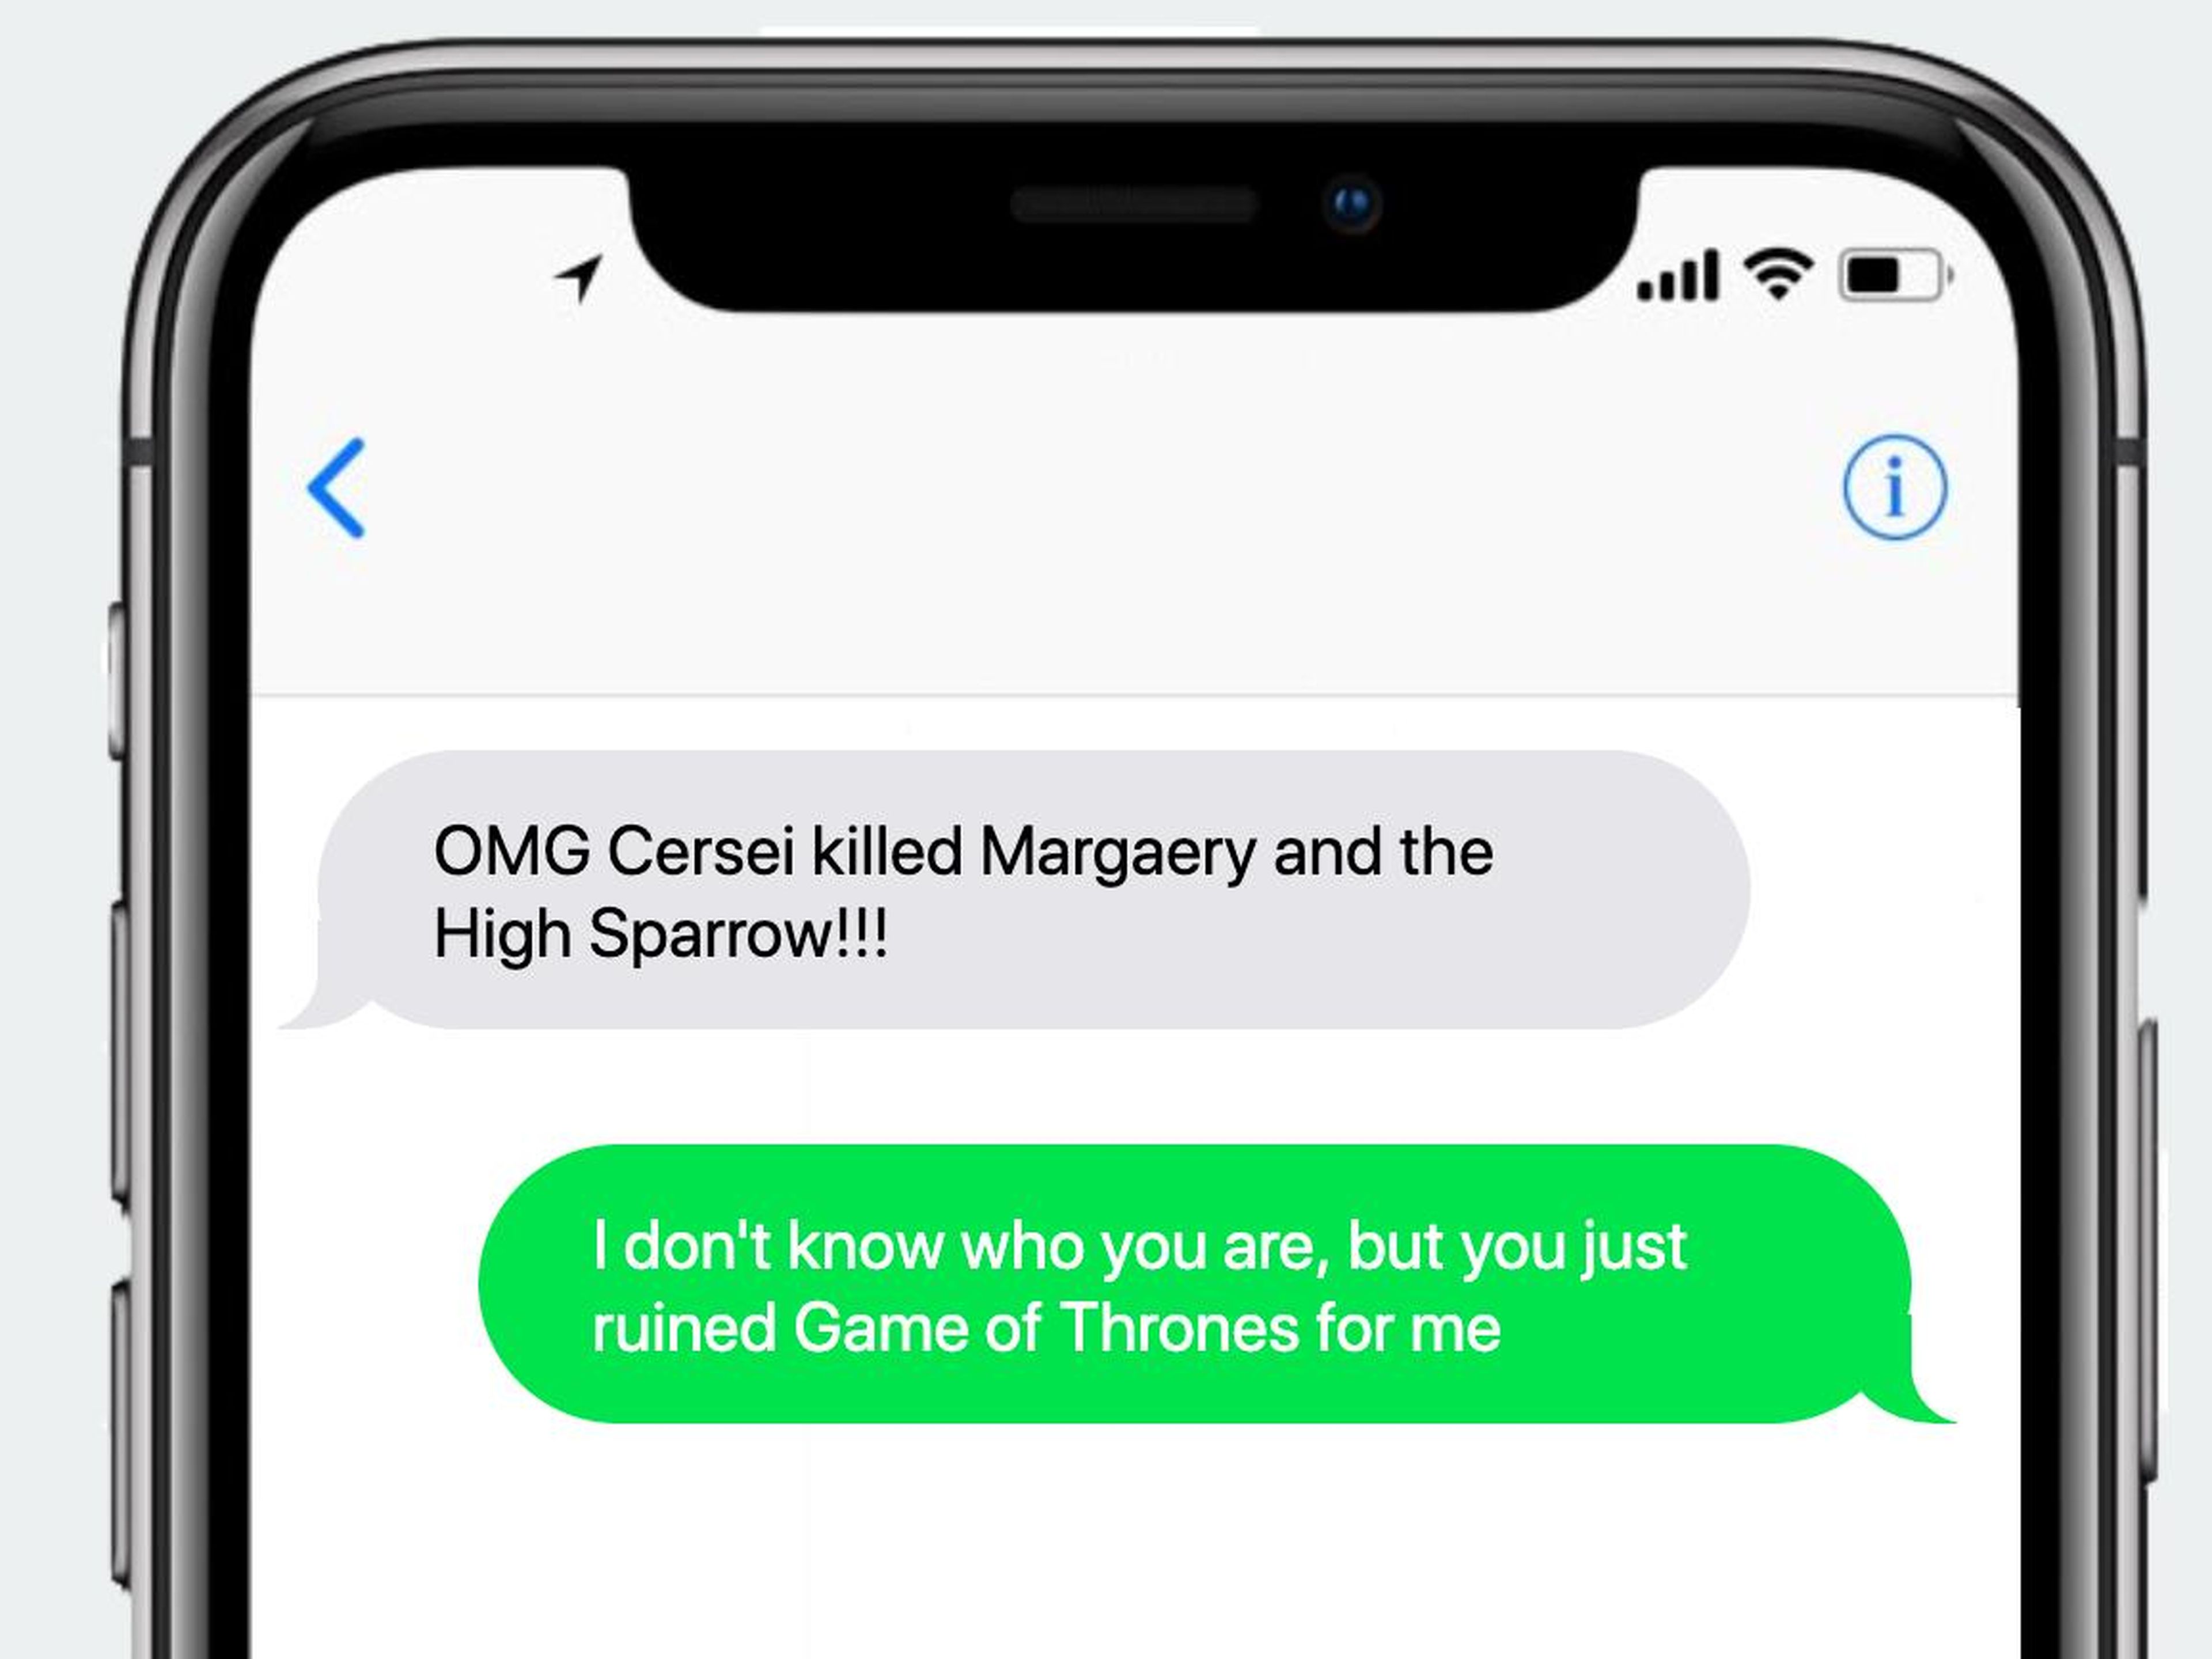 Here's a sample of the Spoiled.io text message.